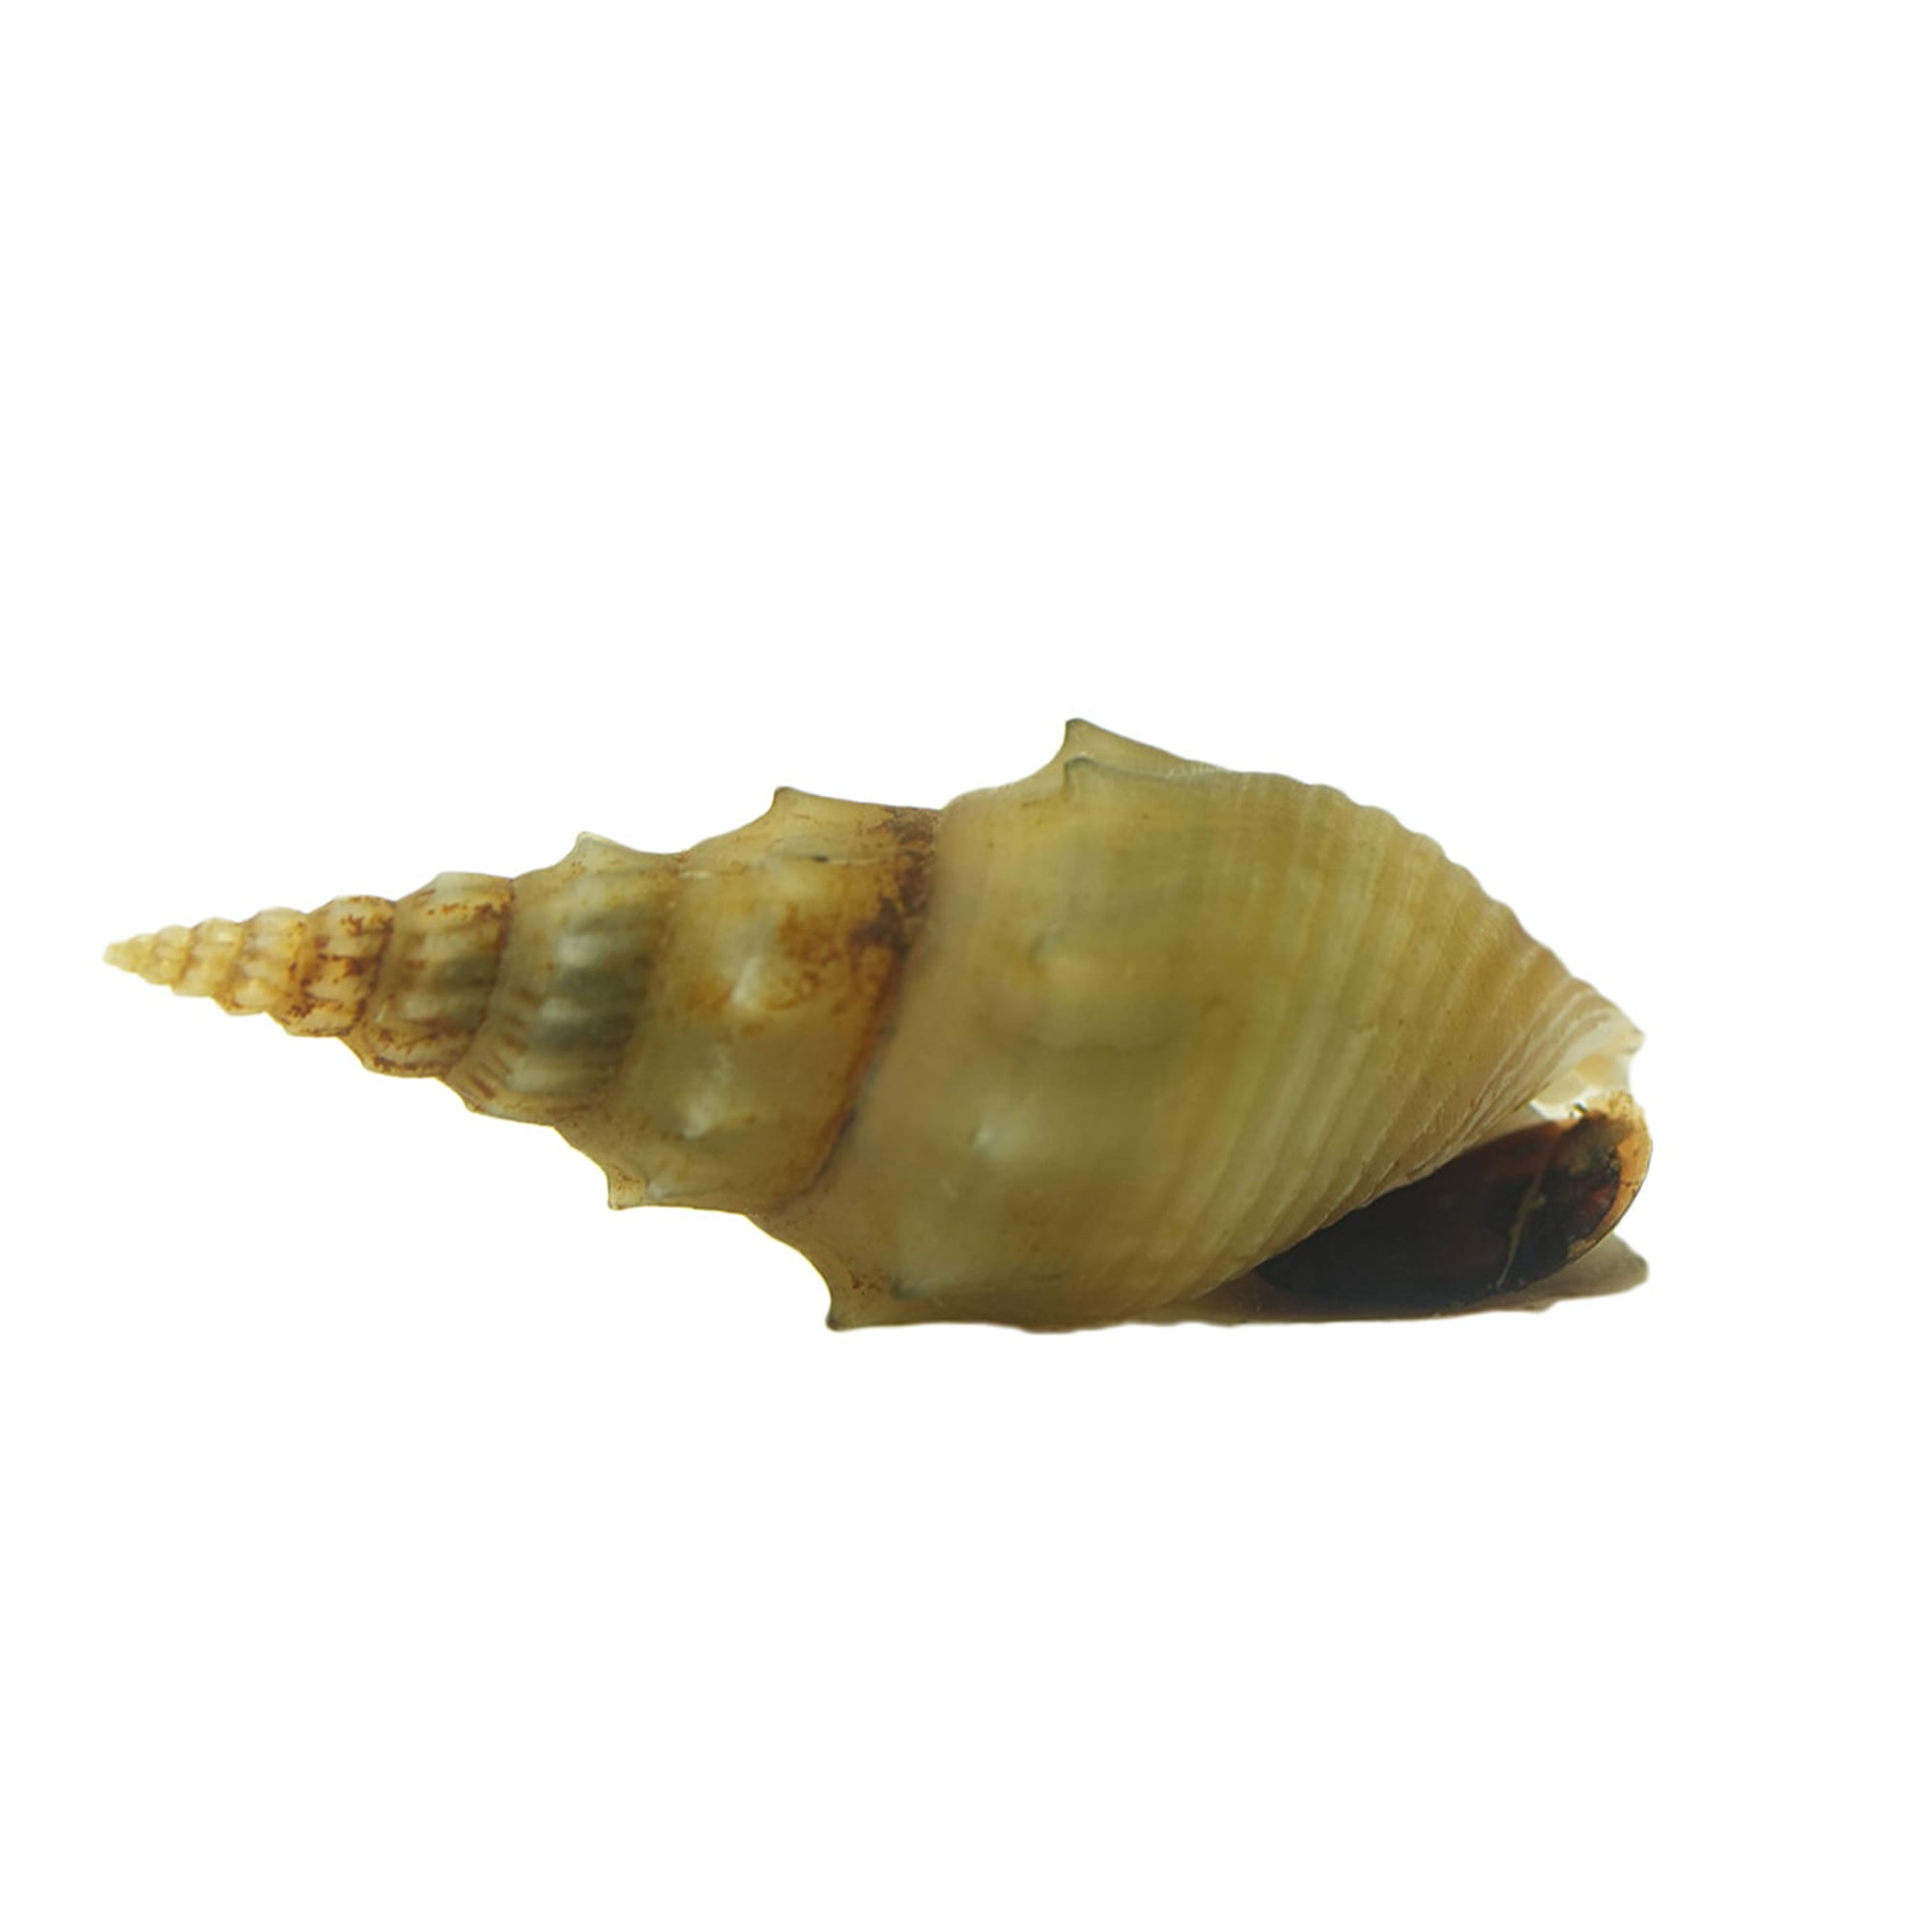 Red Collar Snail (Norrisia norrisi)